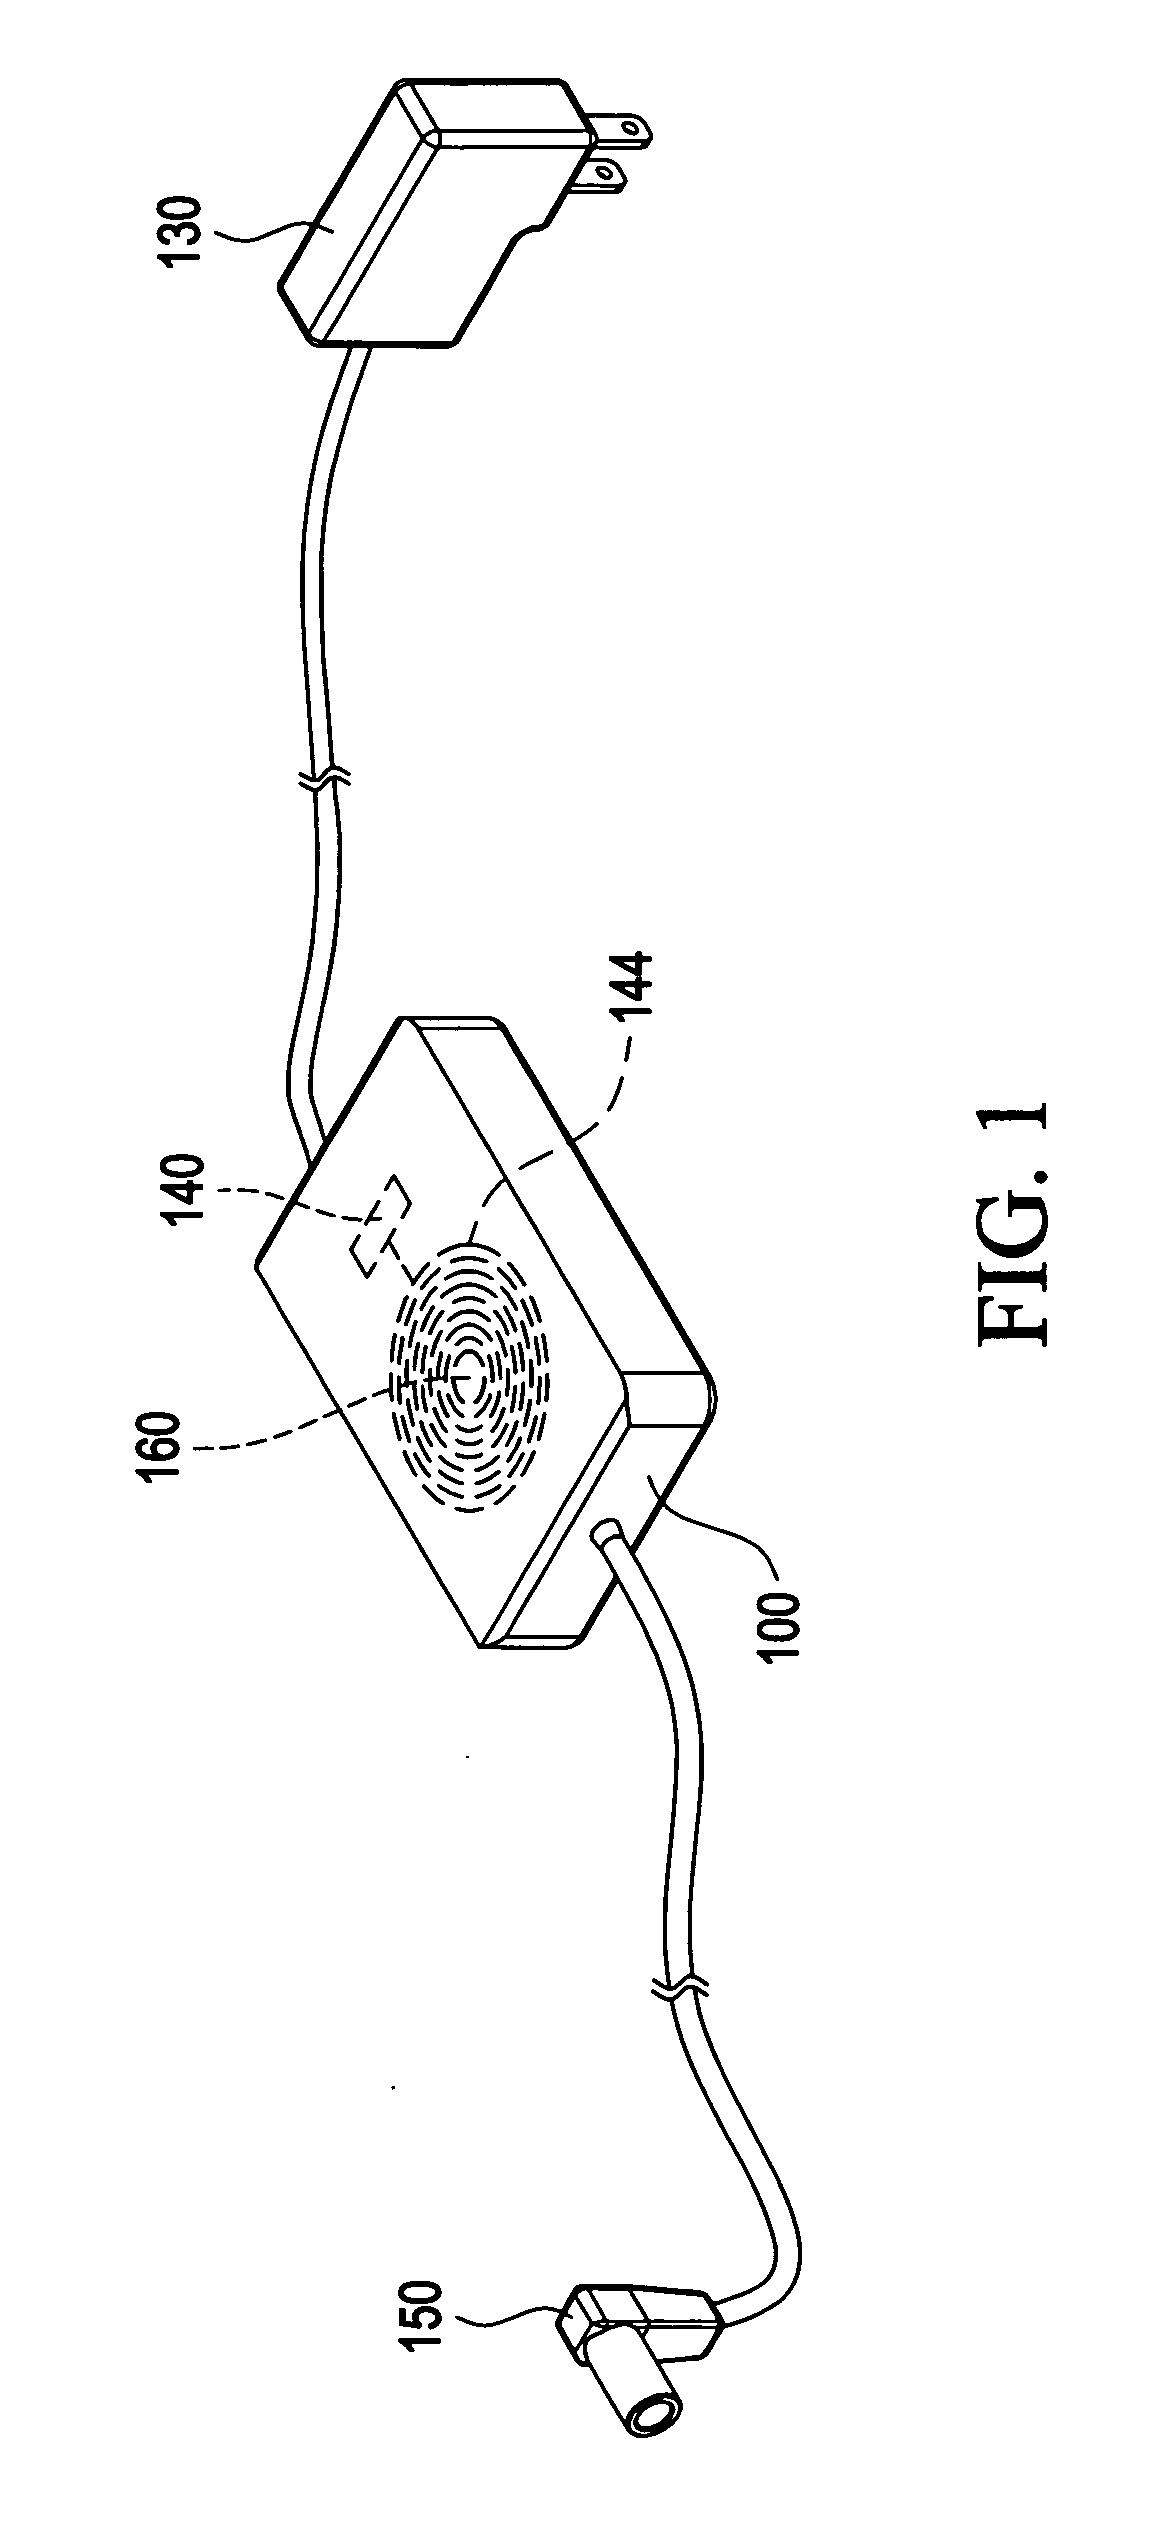 Adapter capable of wireless charging